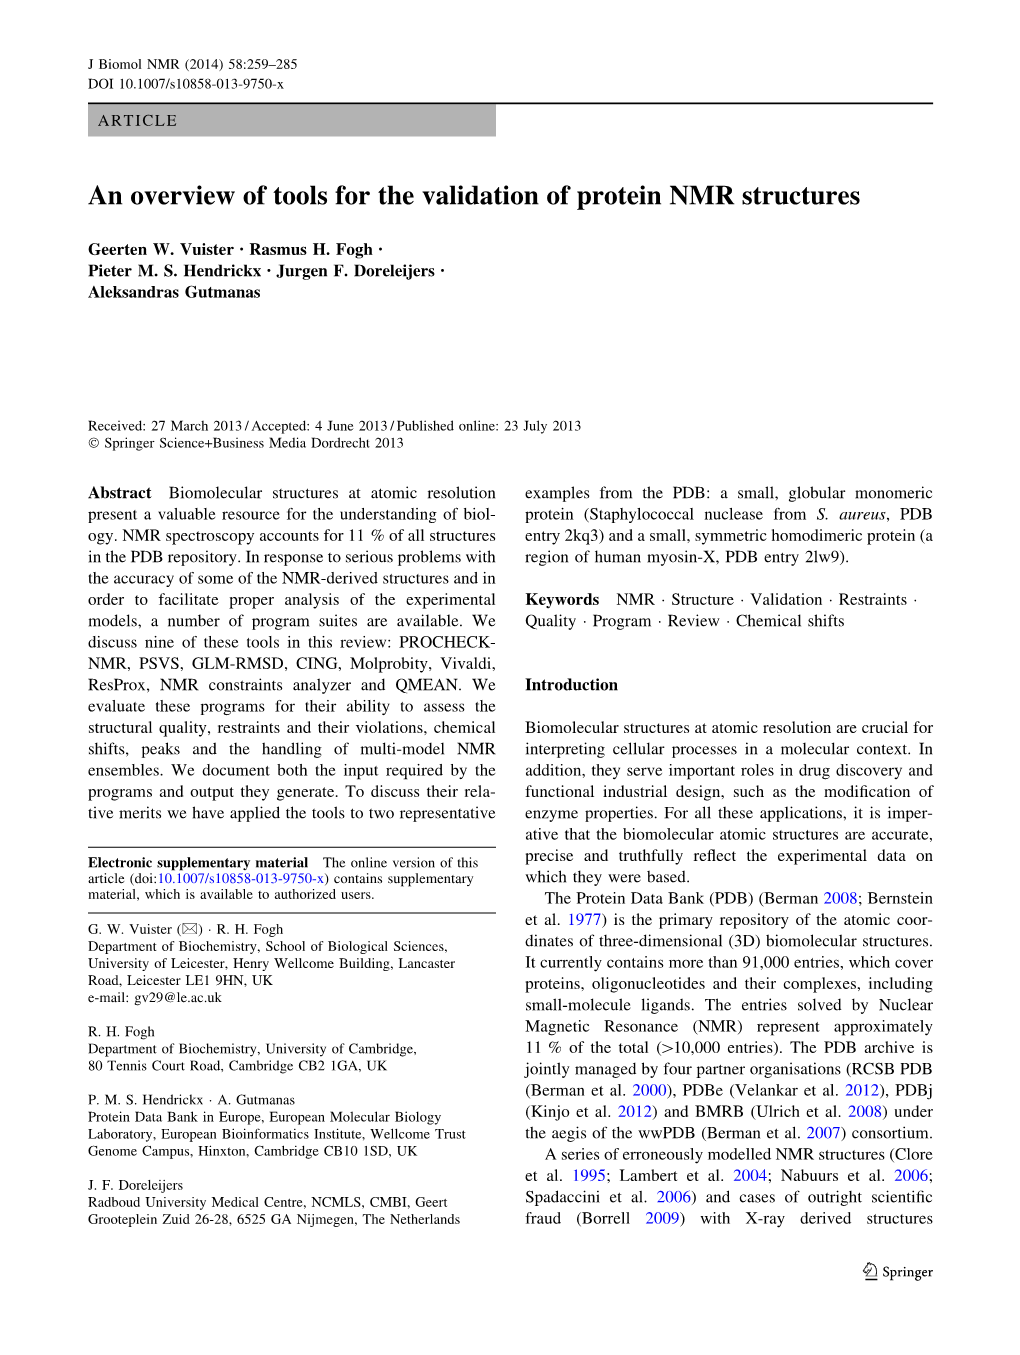 An Overview of Tools for the Validation of Protein NMR Structures